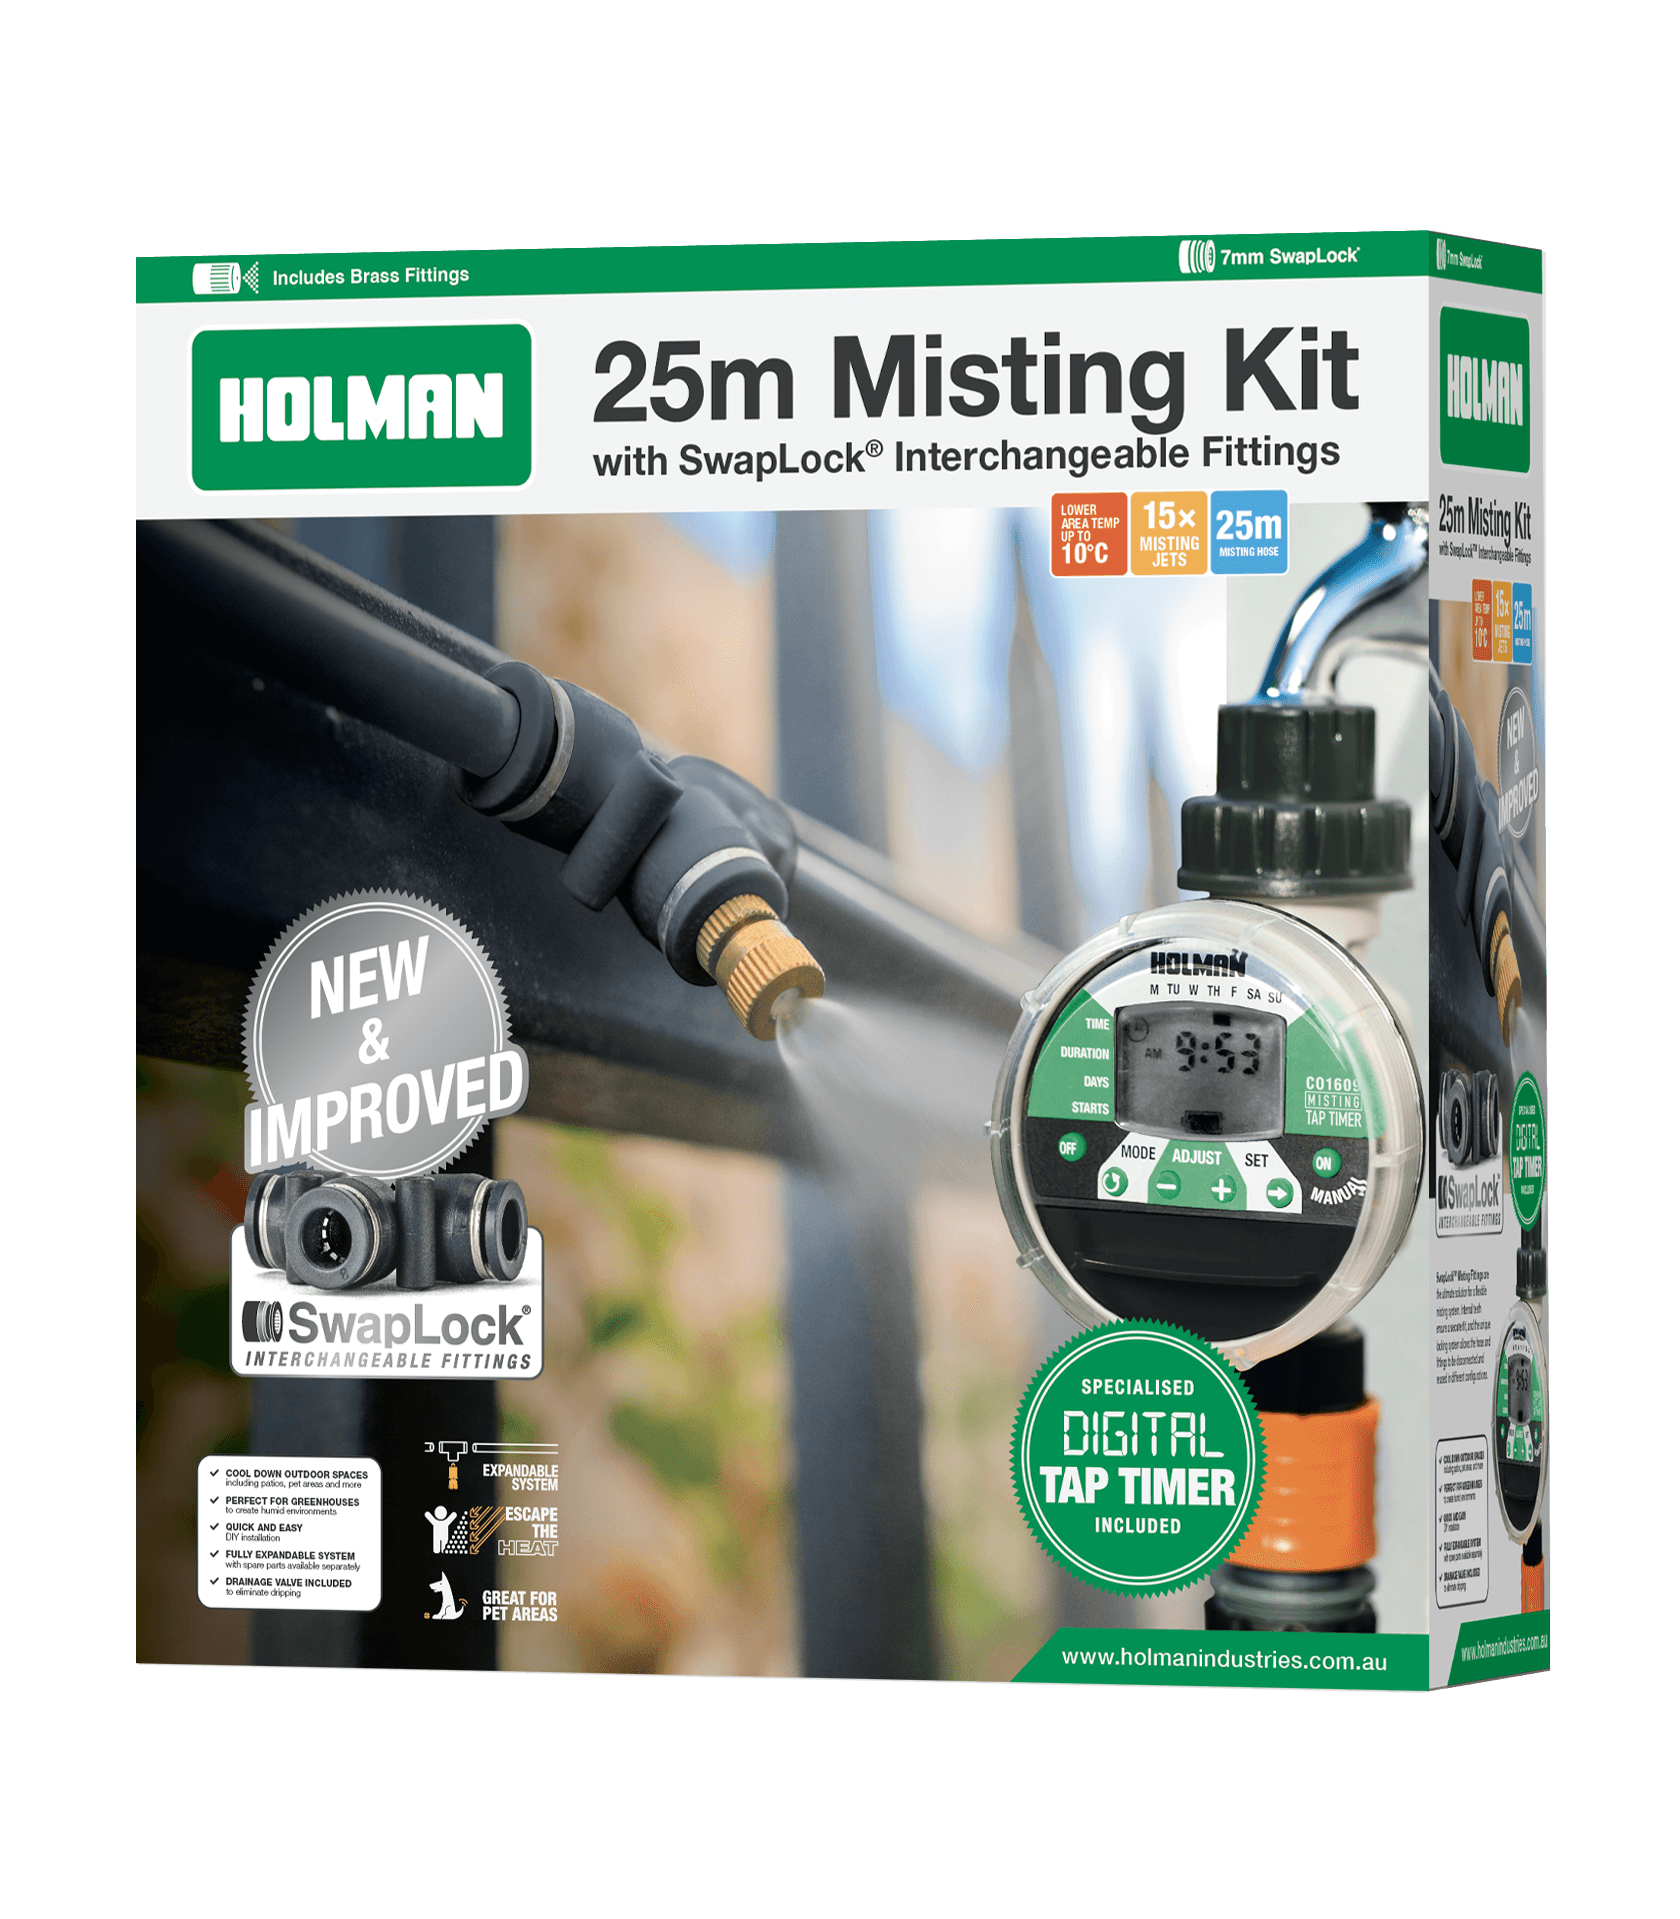 25m Misting Kit with SwapLock® Fittings and Tap Timer - Holman Industries